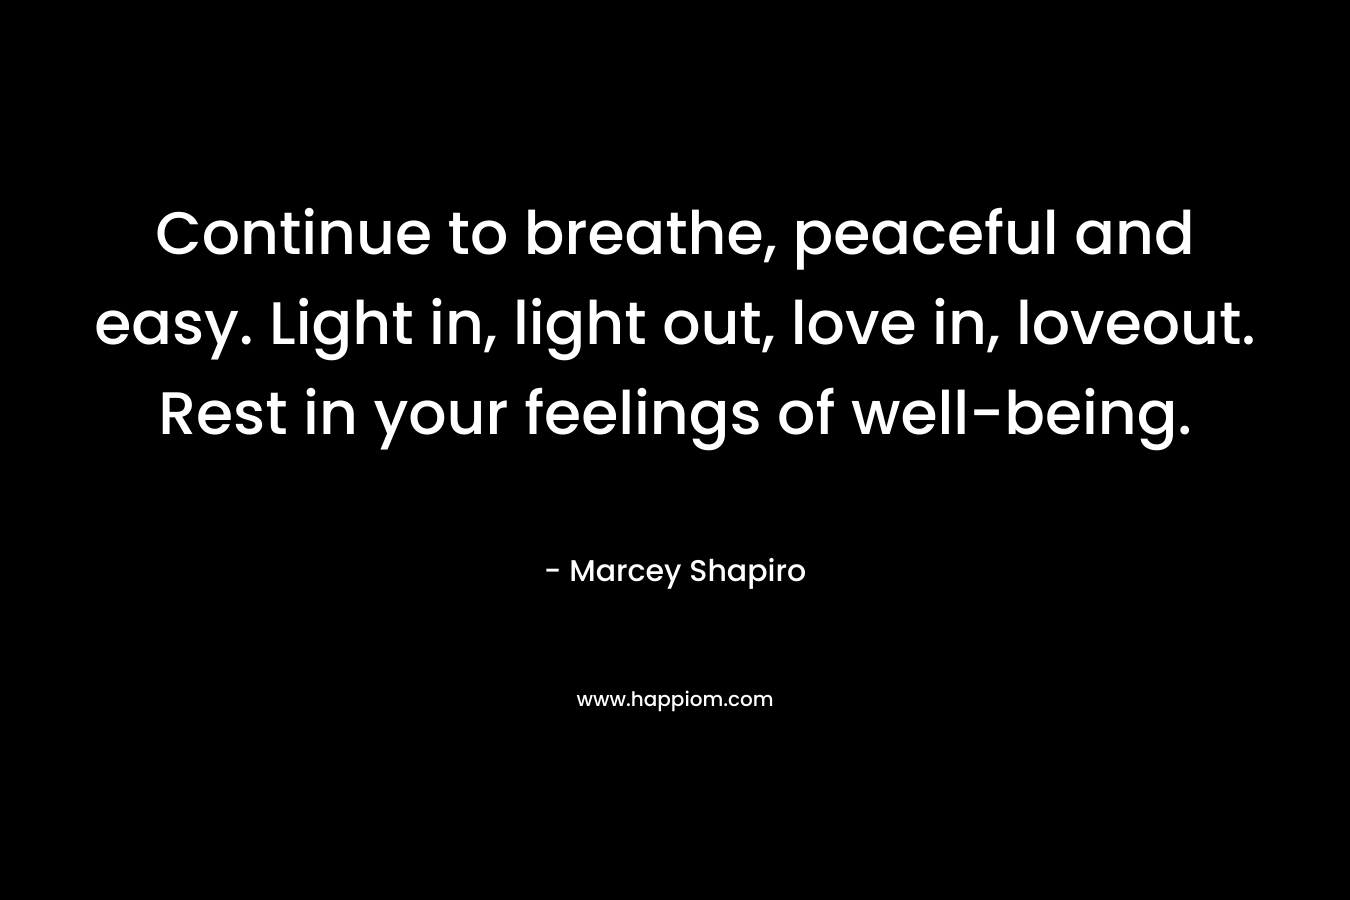 Continue to breathe, peaceful and easy. Light in, light out, love in, loveout. Rest in your feelings of well-being.